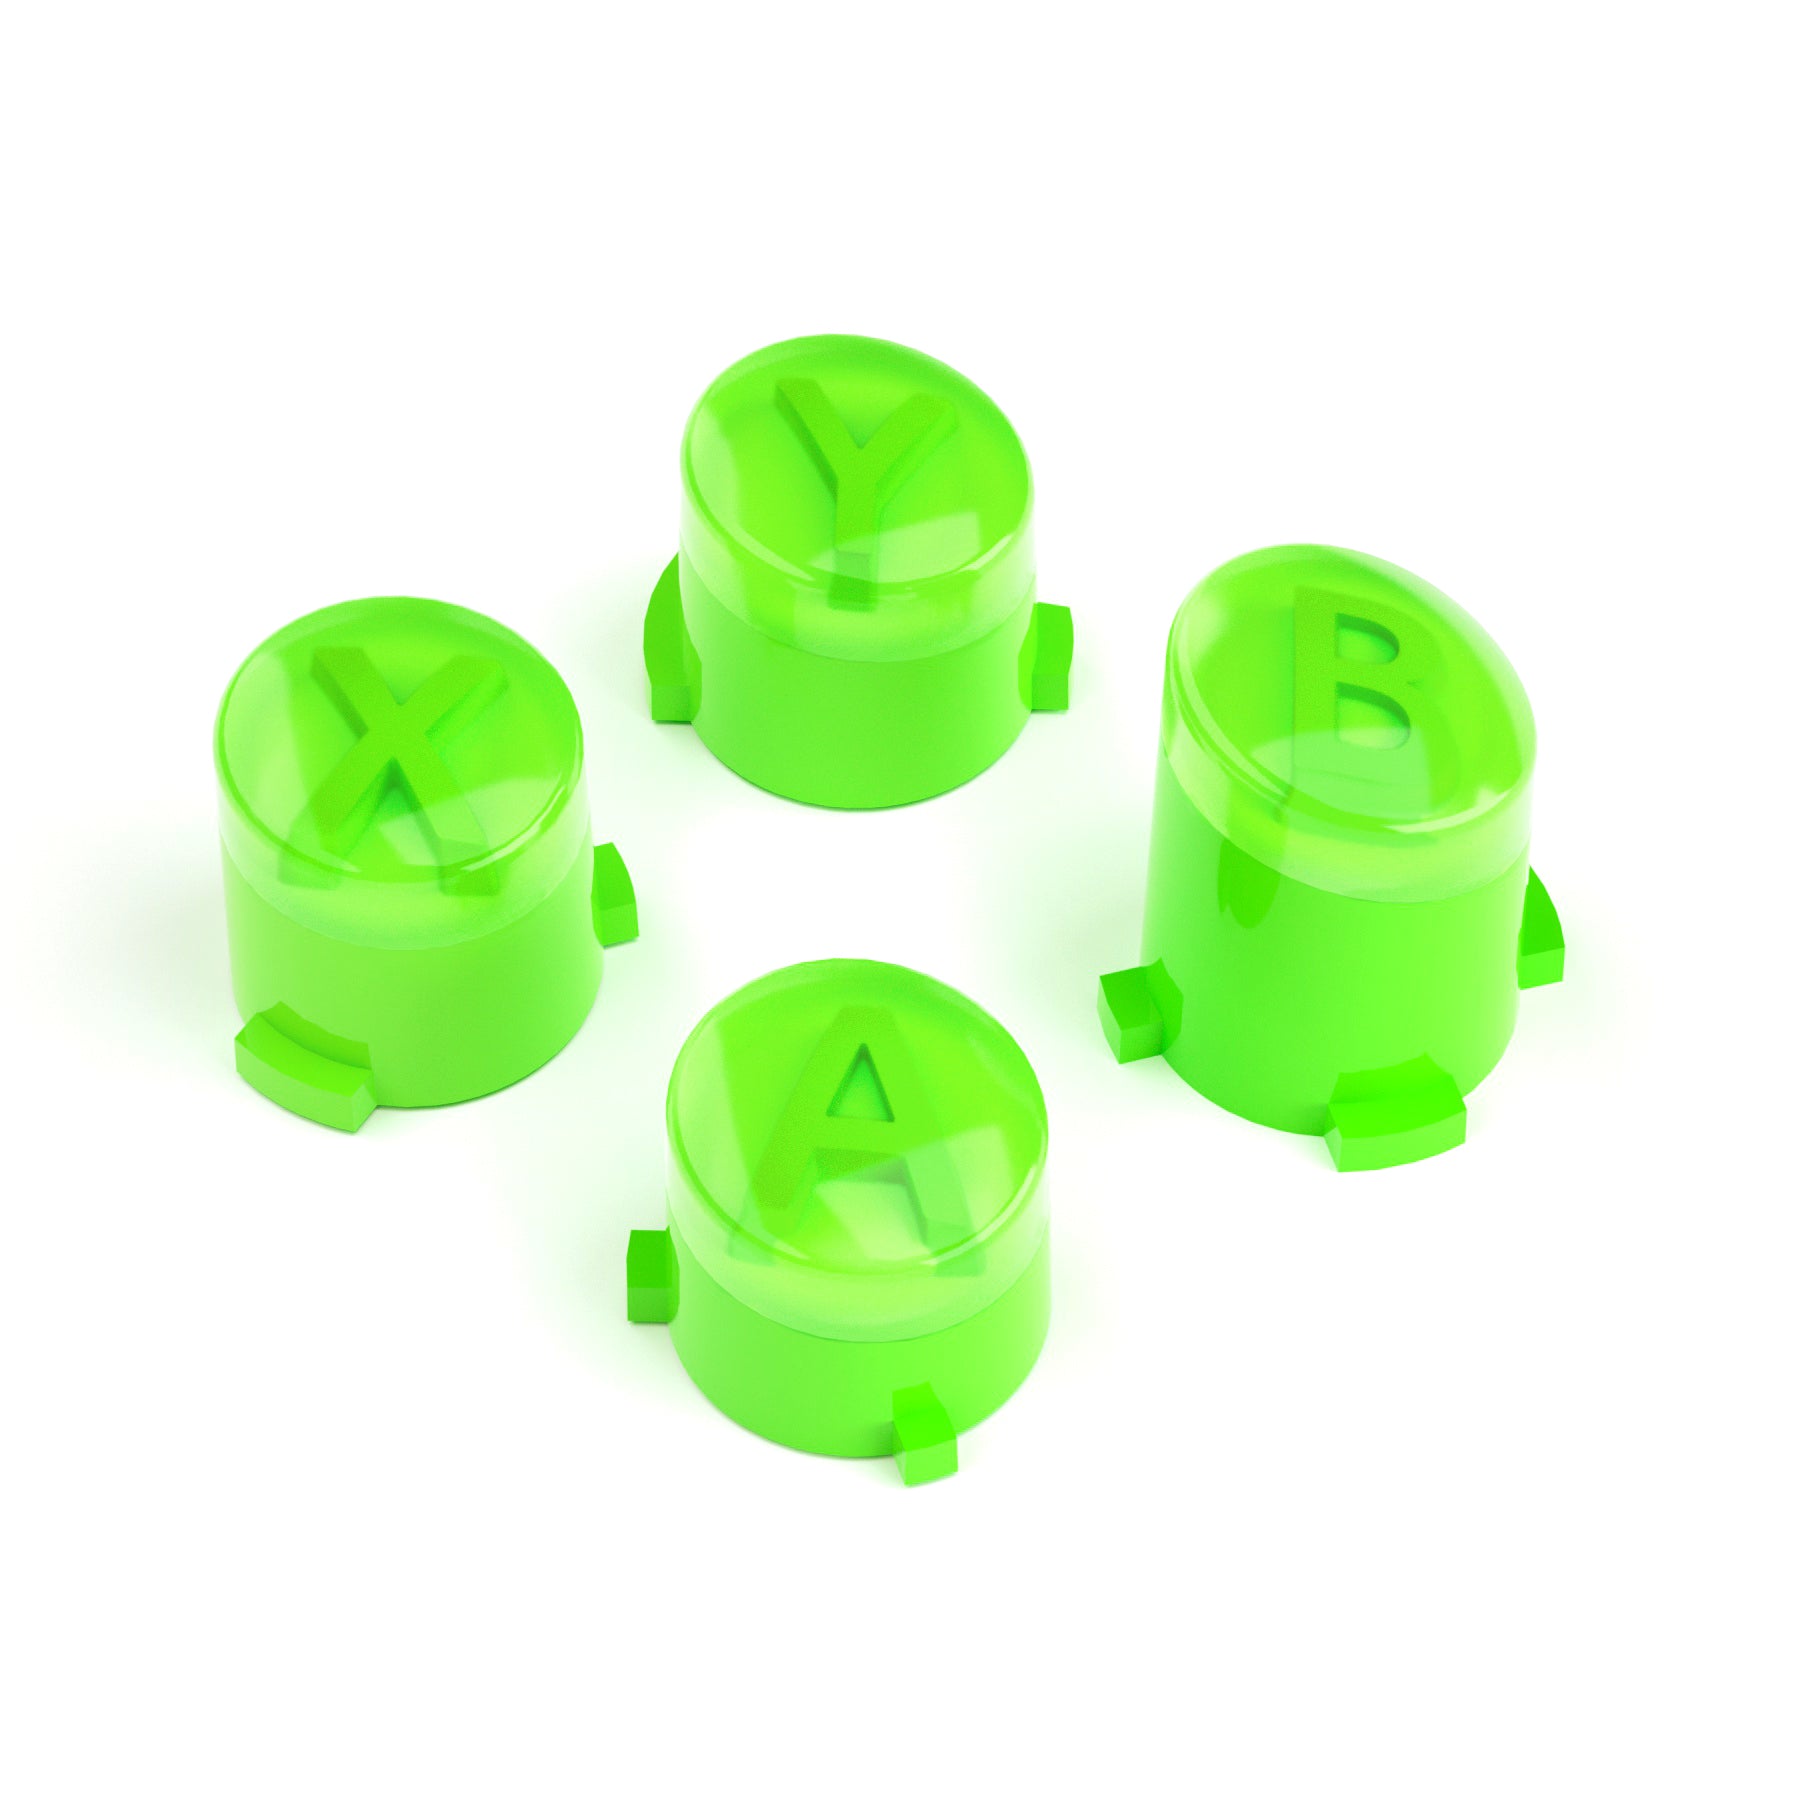 eXtremeRate Replacement Custom ABXY Action Buttons for Xbox Series X & S  Controller, Two-Tone Green & Clear Classic Symbols ABXY Keys for Xbox One  S/X Elite V1/V2 Controller – eXtremeRate Retail